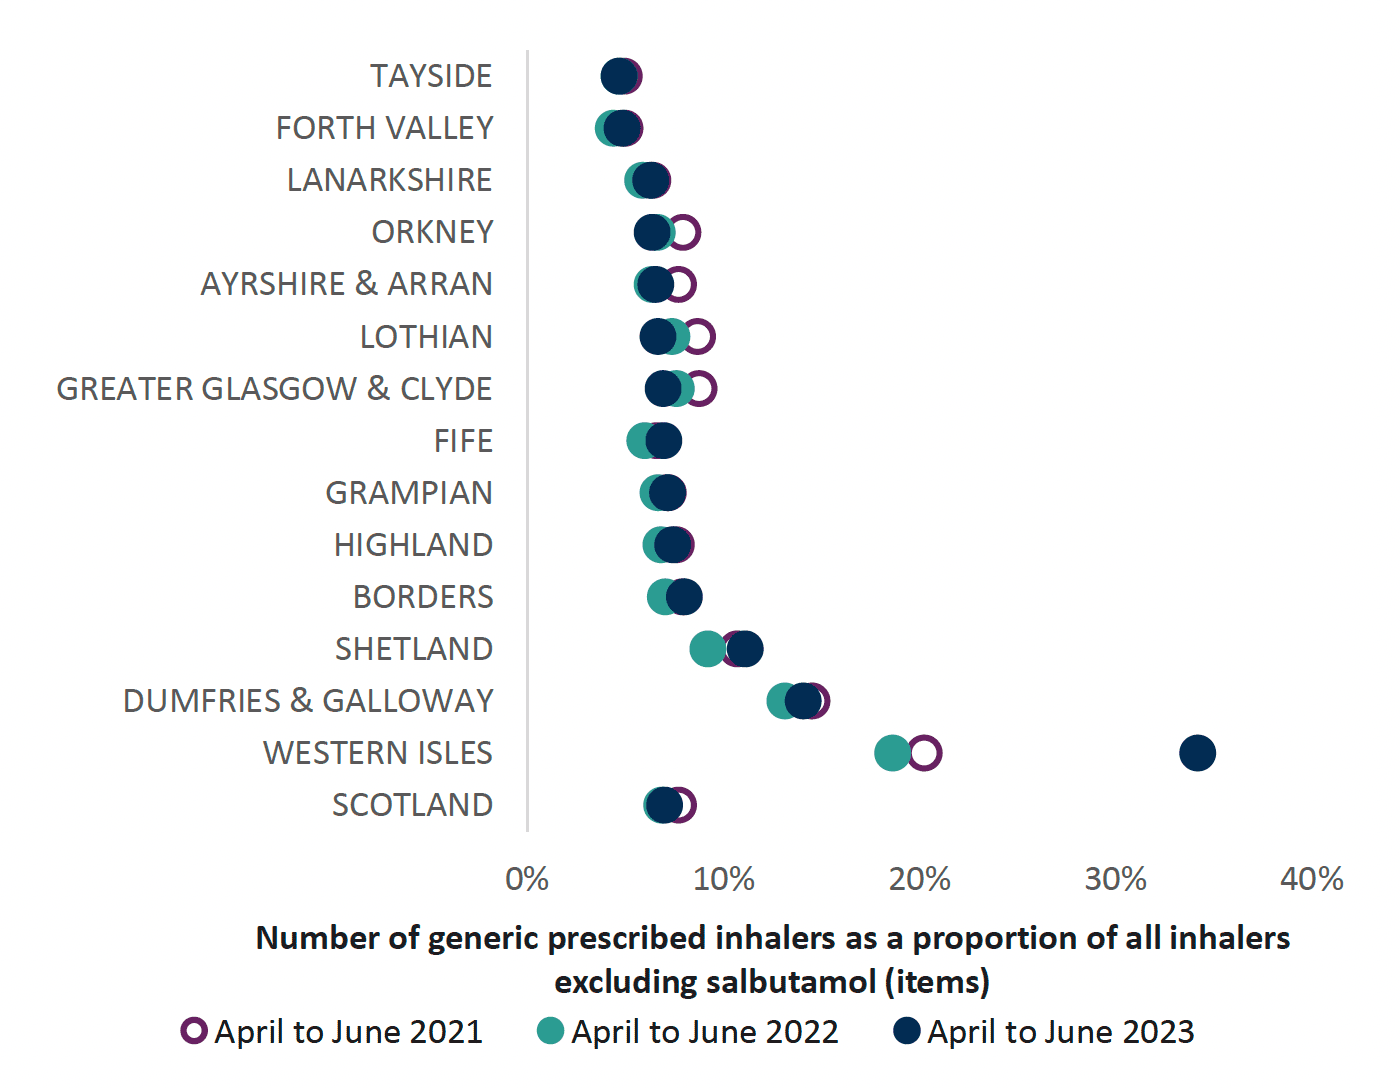 Chart showing variance of generically prescribed inhalers across all health boards and Scotland from 2021 to 2023. Overall Scotland trend is decreasing